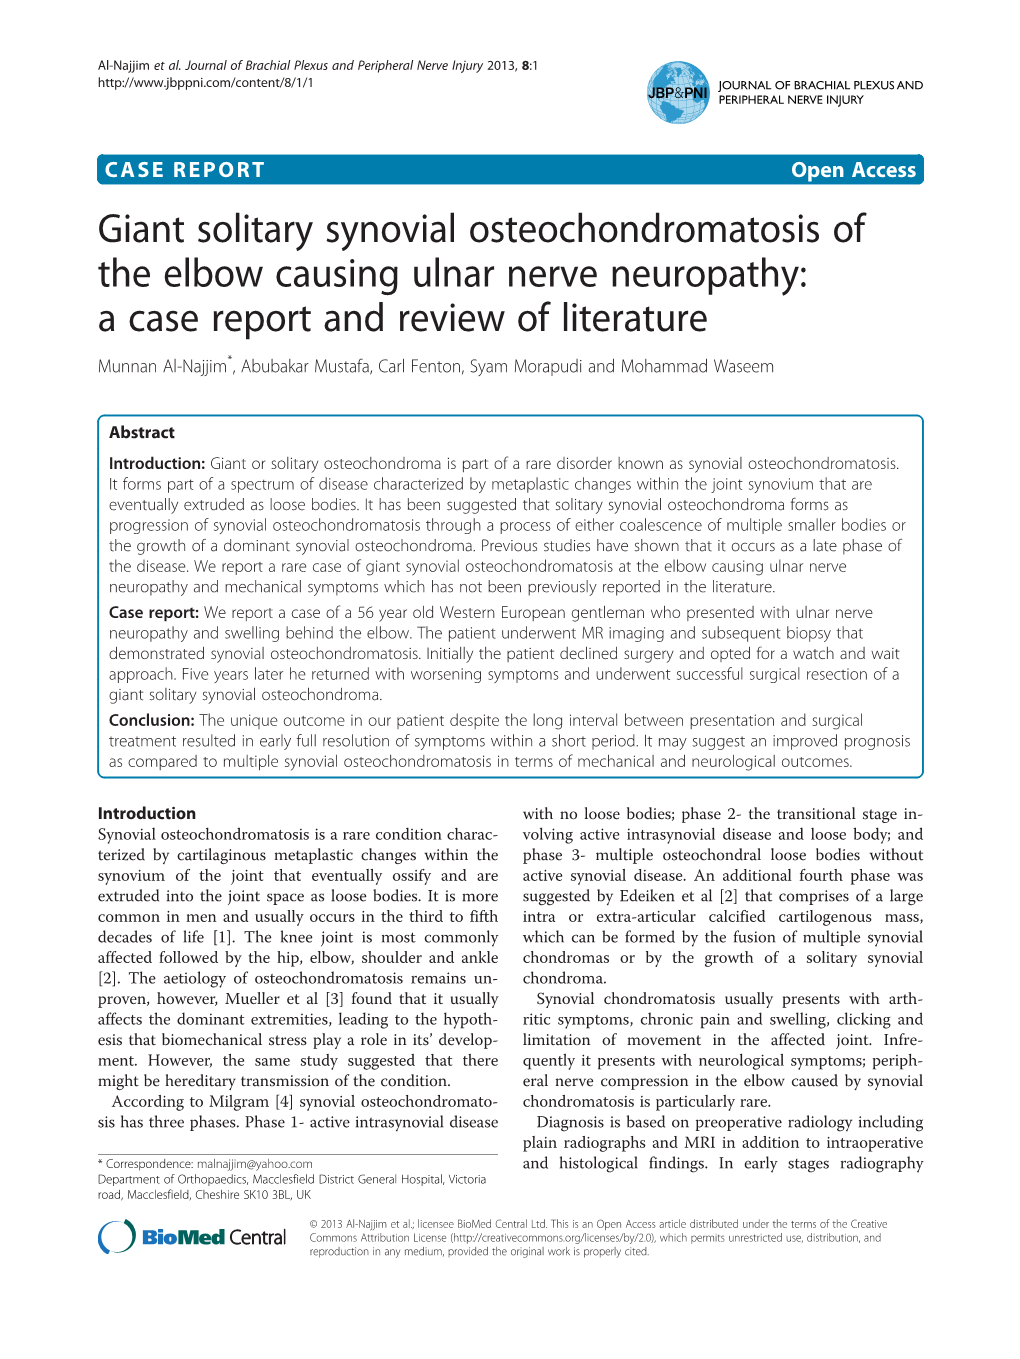 Giant Solitary Synovial Osteochondromatosis of the Elbow